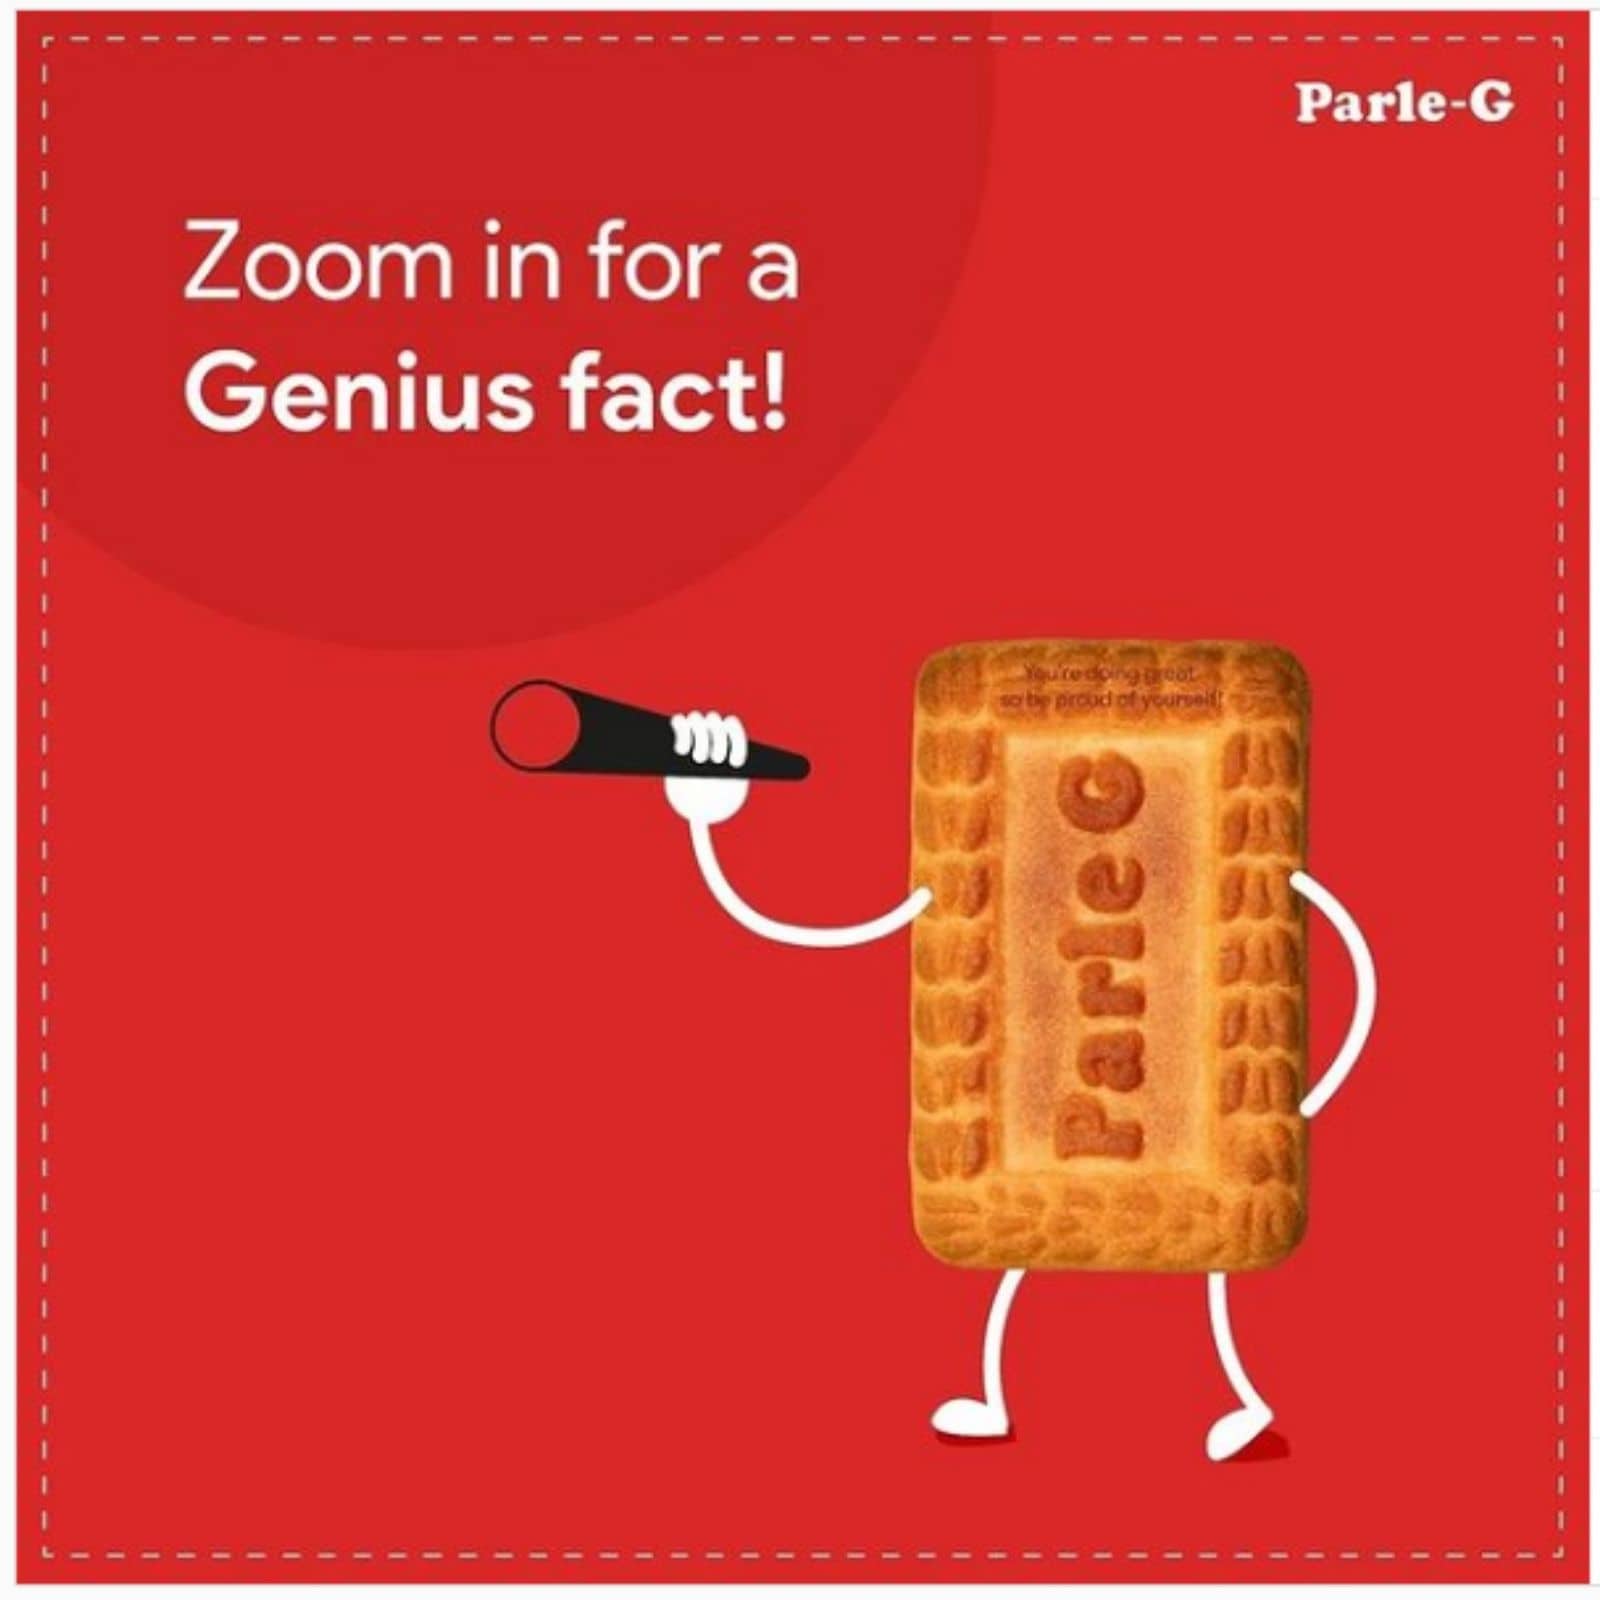 How Are You Feeling?' Parle-G's Post Asking about People's Well-being Wins Hearts